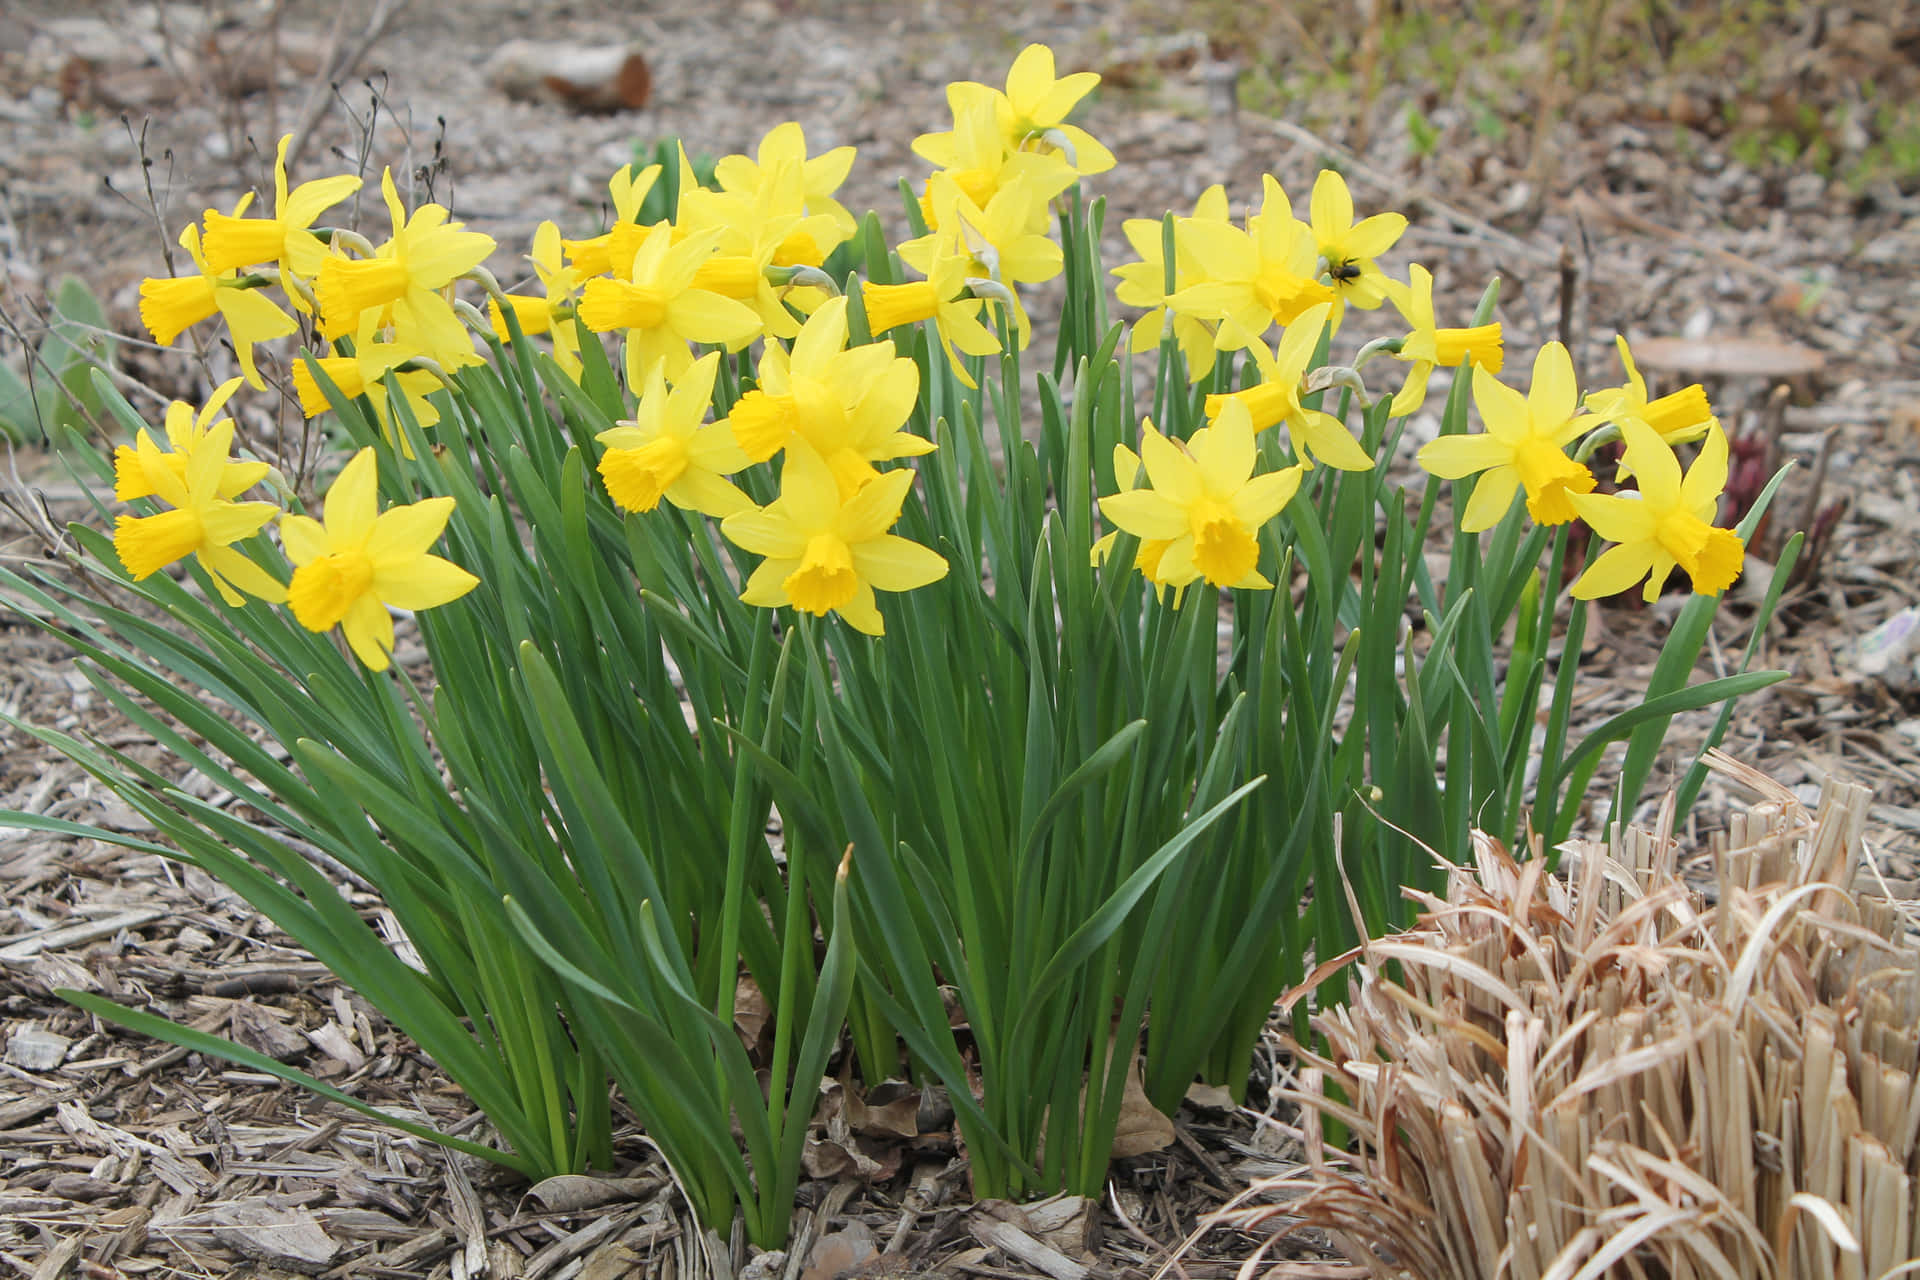 Captivating Beauty Of Spring's Dazzling Daffodils